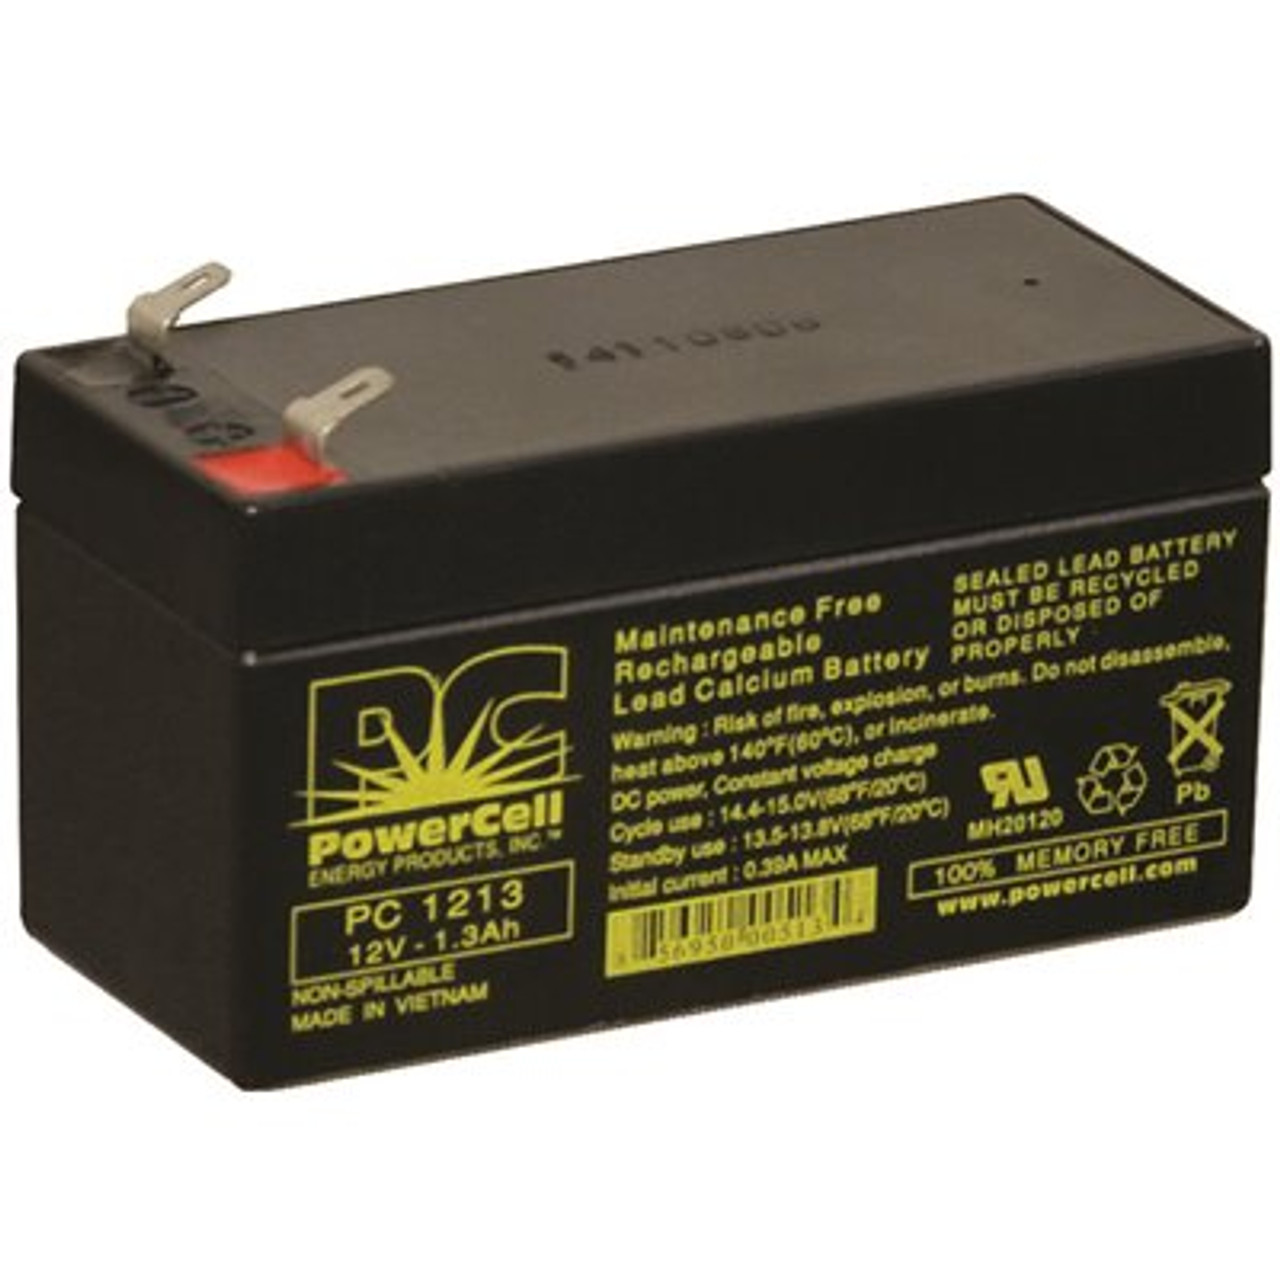 12-Volt 1.3 Ah, F1 Terminal, Sealed Lead-Acid, AGM, Maintenance Free, Rechargeable, Non-spillable, Battery